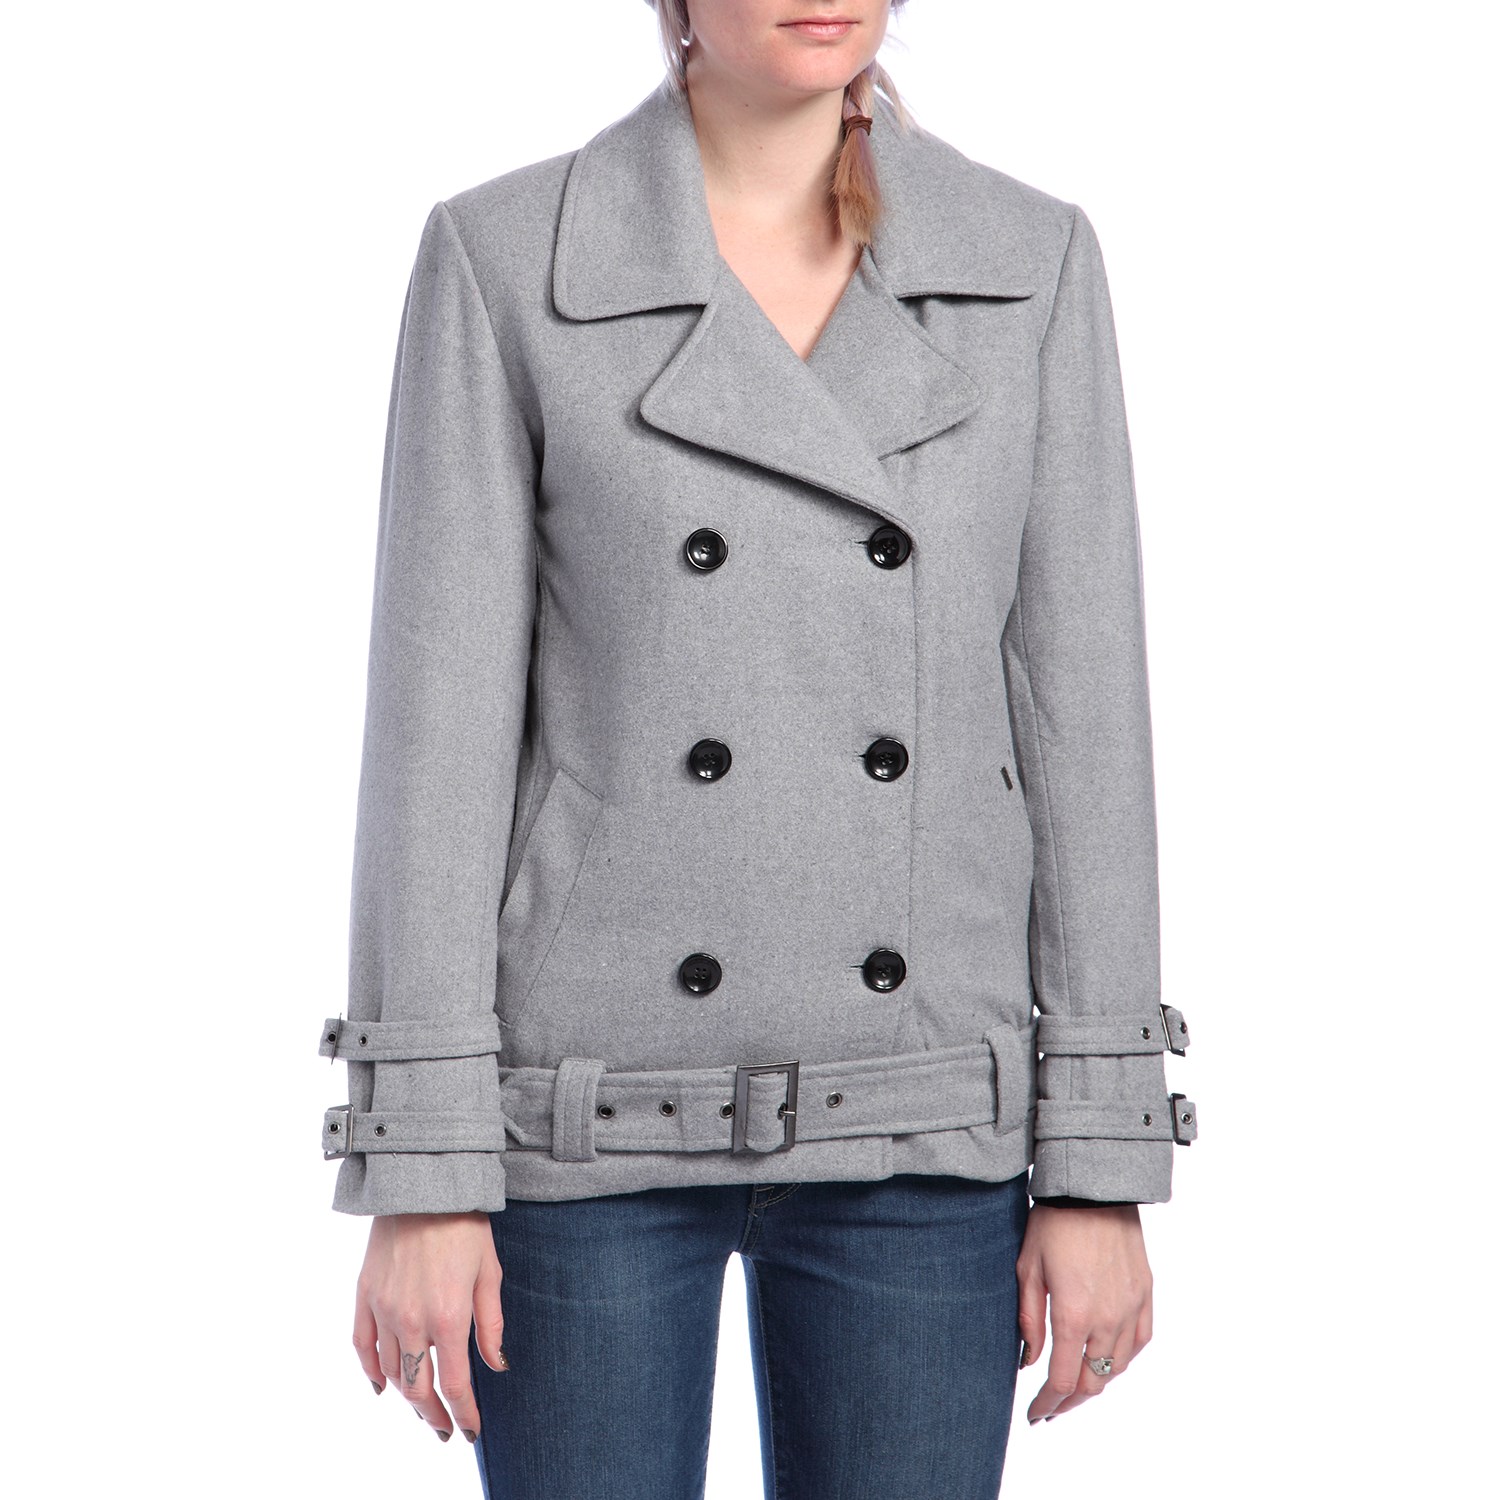 Obey Clothing Oxford Jacket - Women's